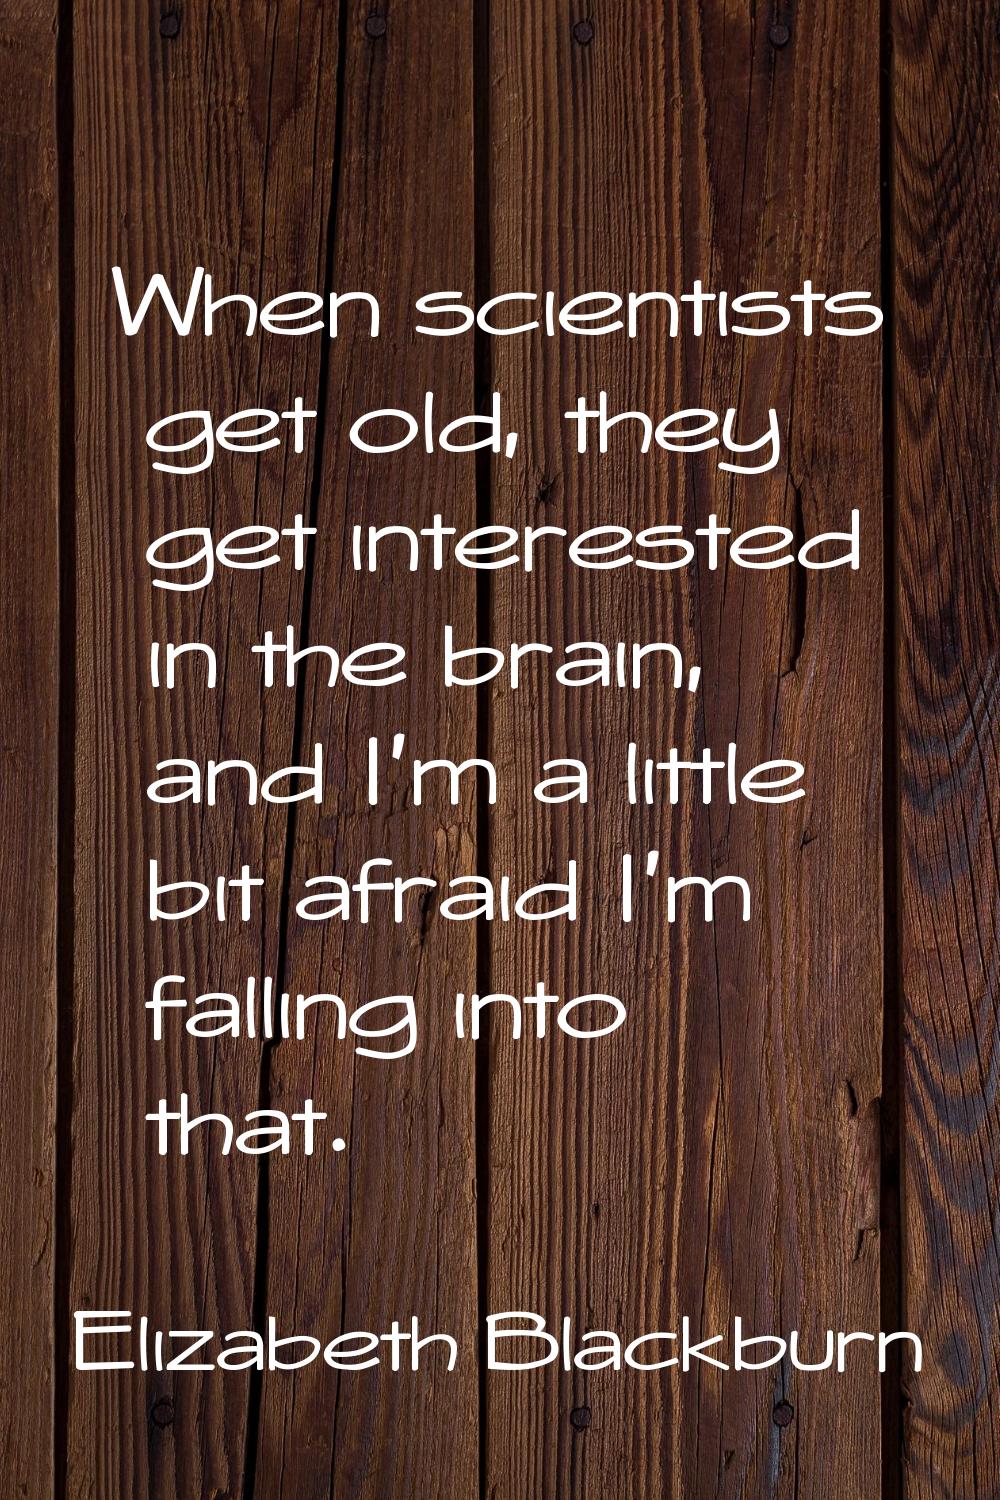 When scientists get old, they get interested in the brain, and I'm a little bit afraid I'm falling 